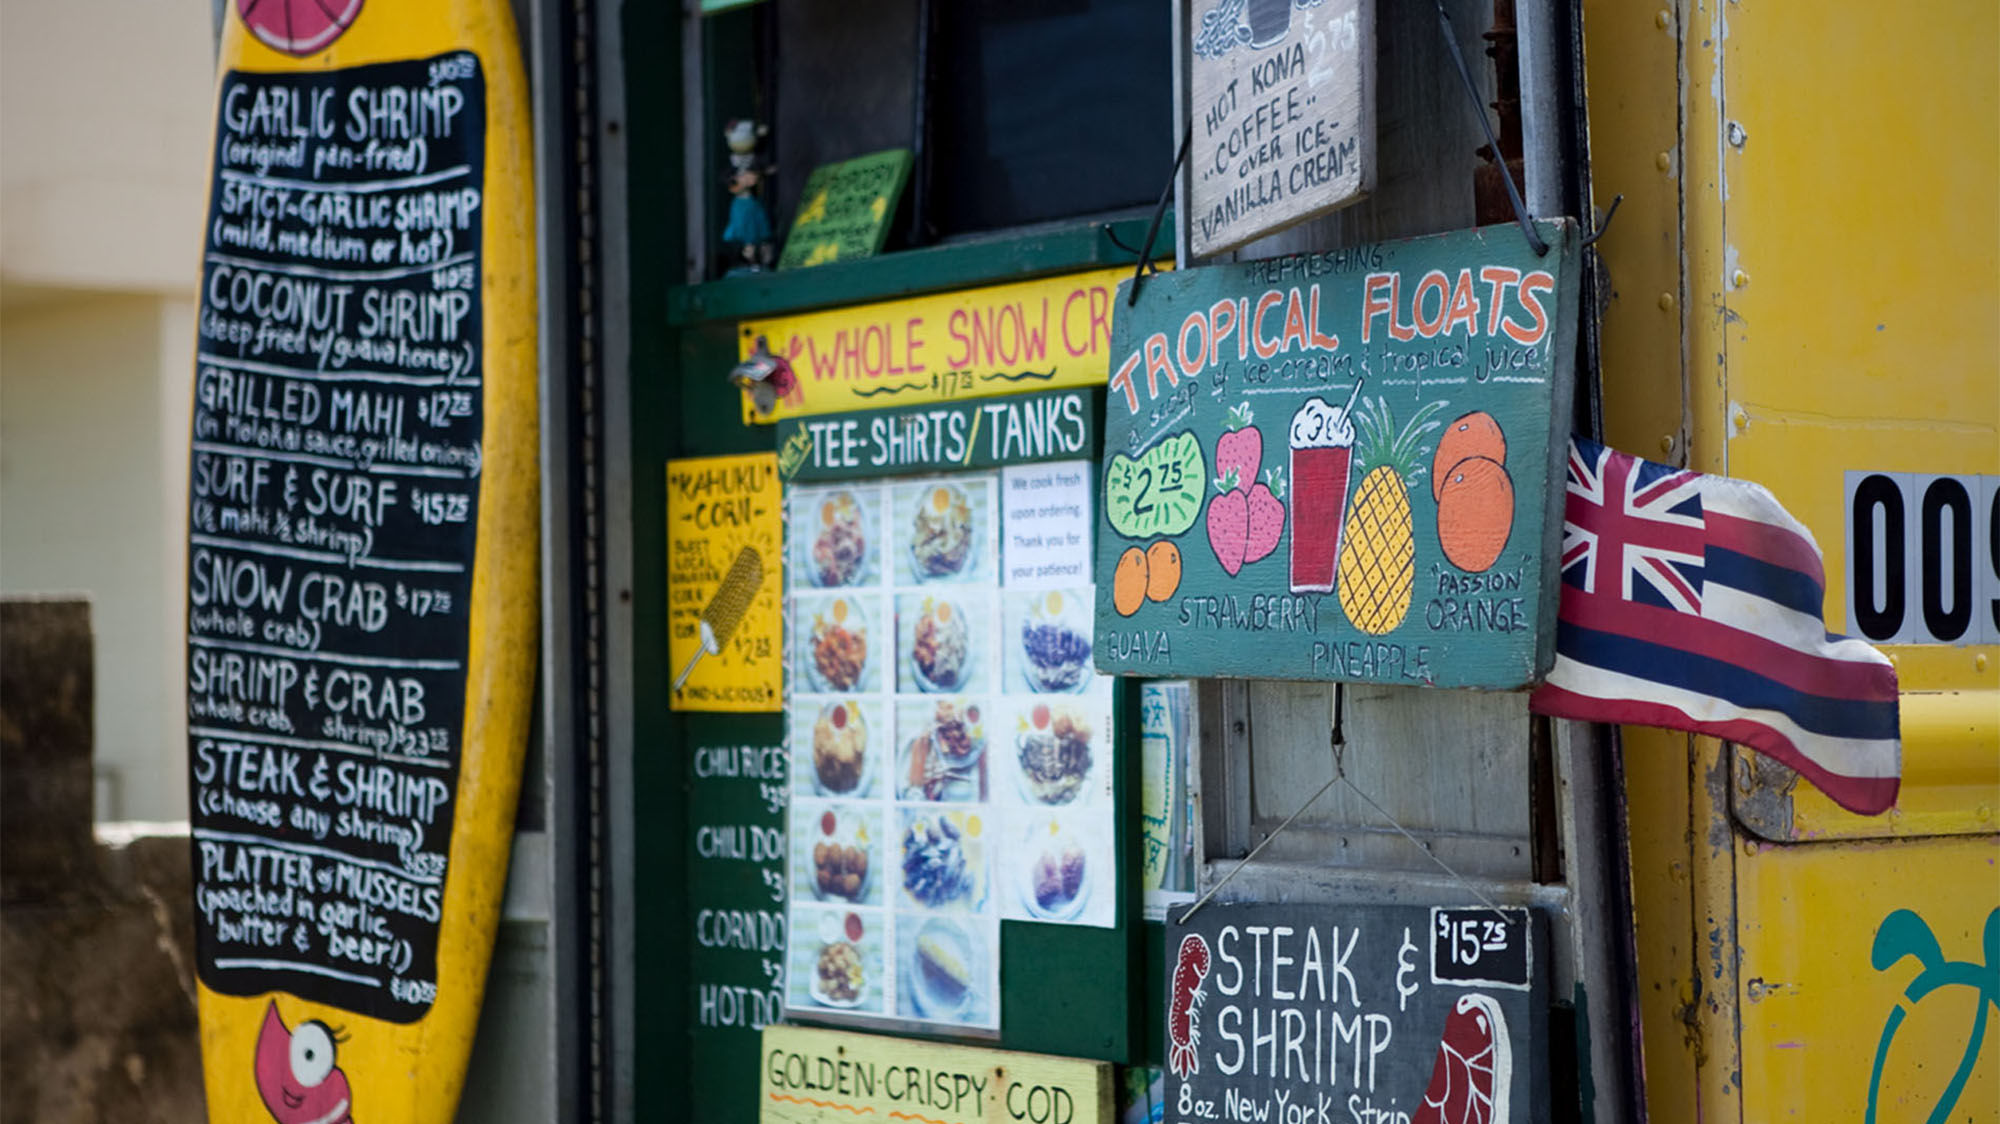 The North Shore surf towns have a laid-back vibe and offer plenty of food trucks, serving everything from shrimp to shave ice.